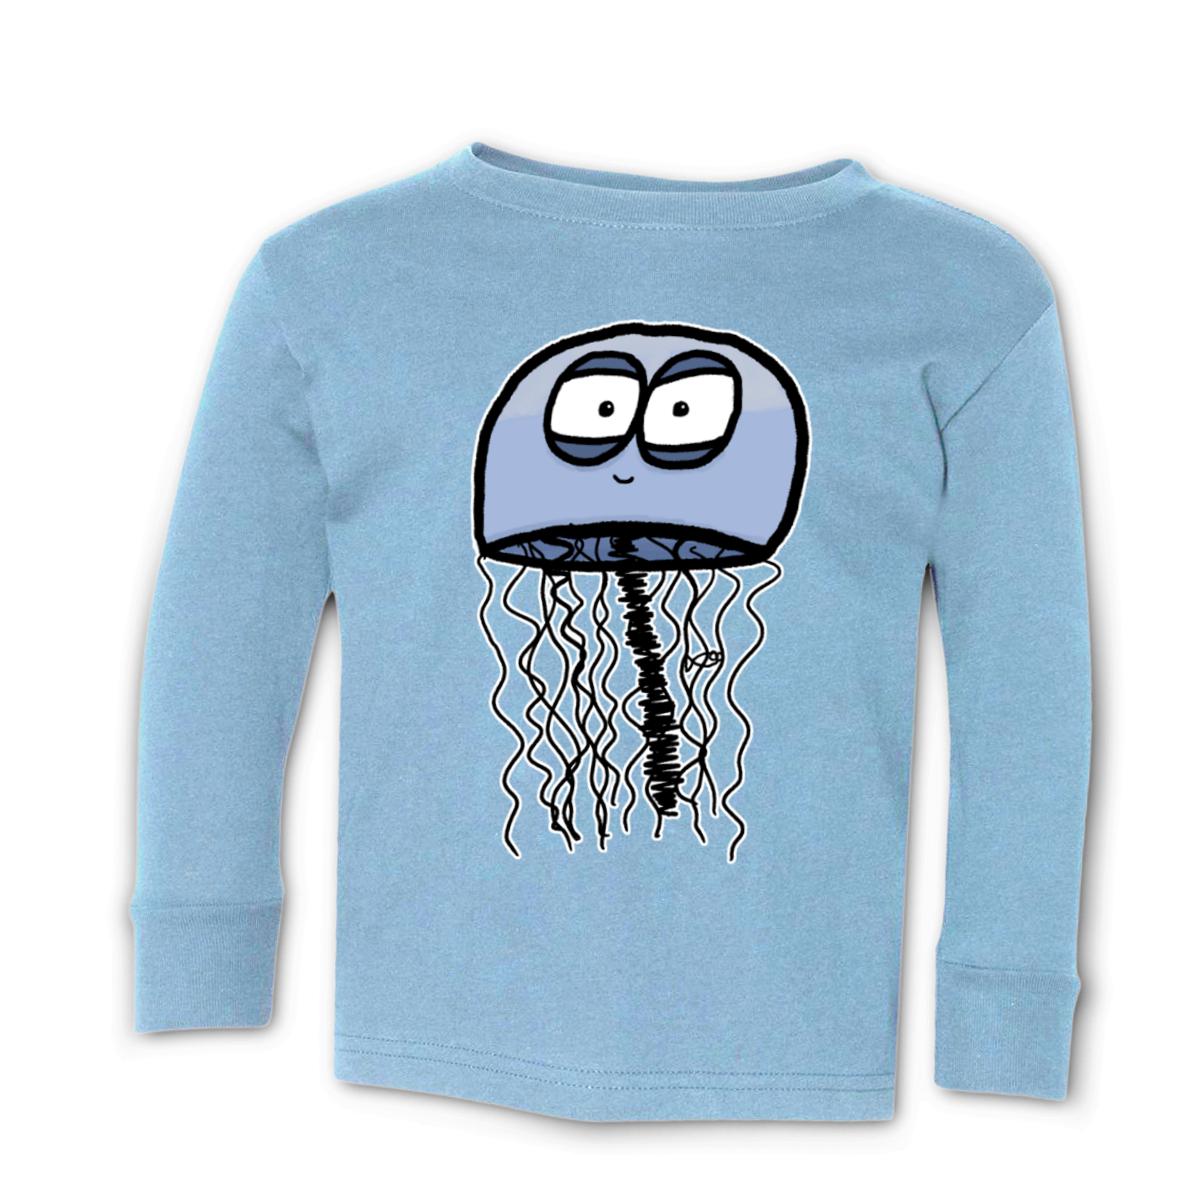 Jelly Fish Toddler Long Sleeve Tee 2T light-blue